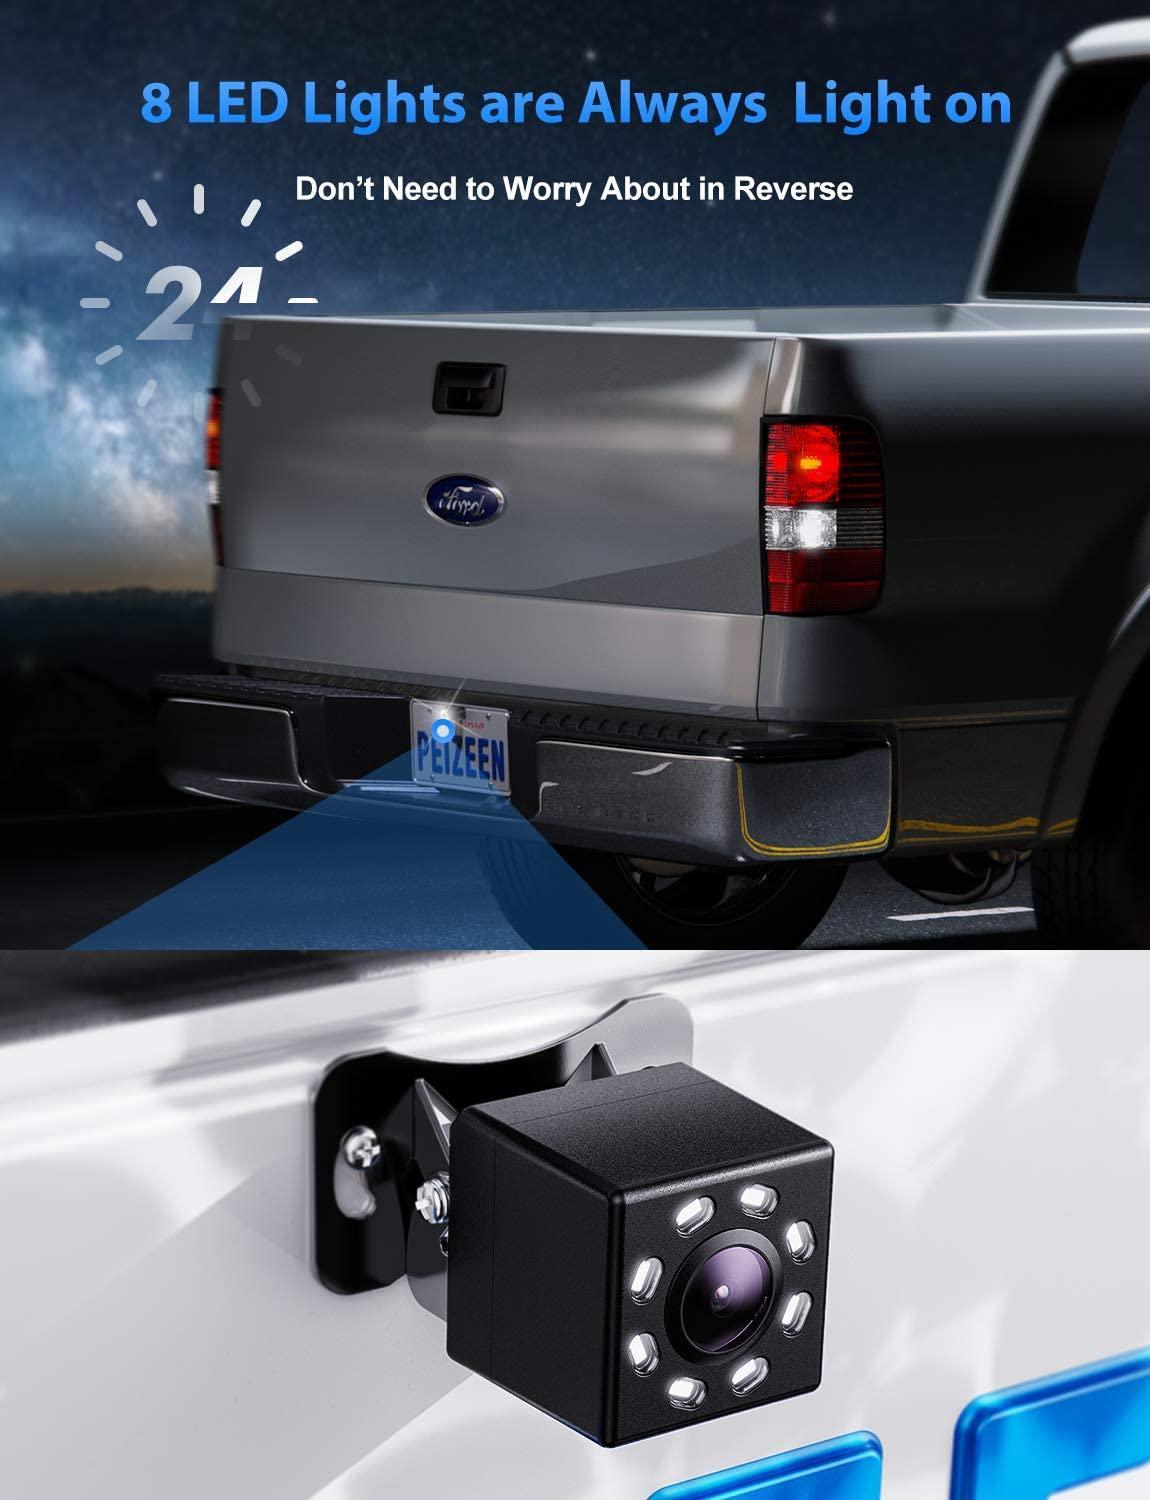 Backup HD 8 Auto LED Night Vision Rear View Waterproof Wide Angle Reverse Camera Suitable 12V Wireless Screen for Cars (CT3)